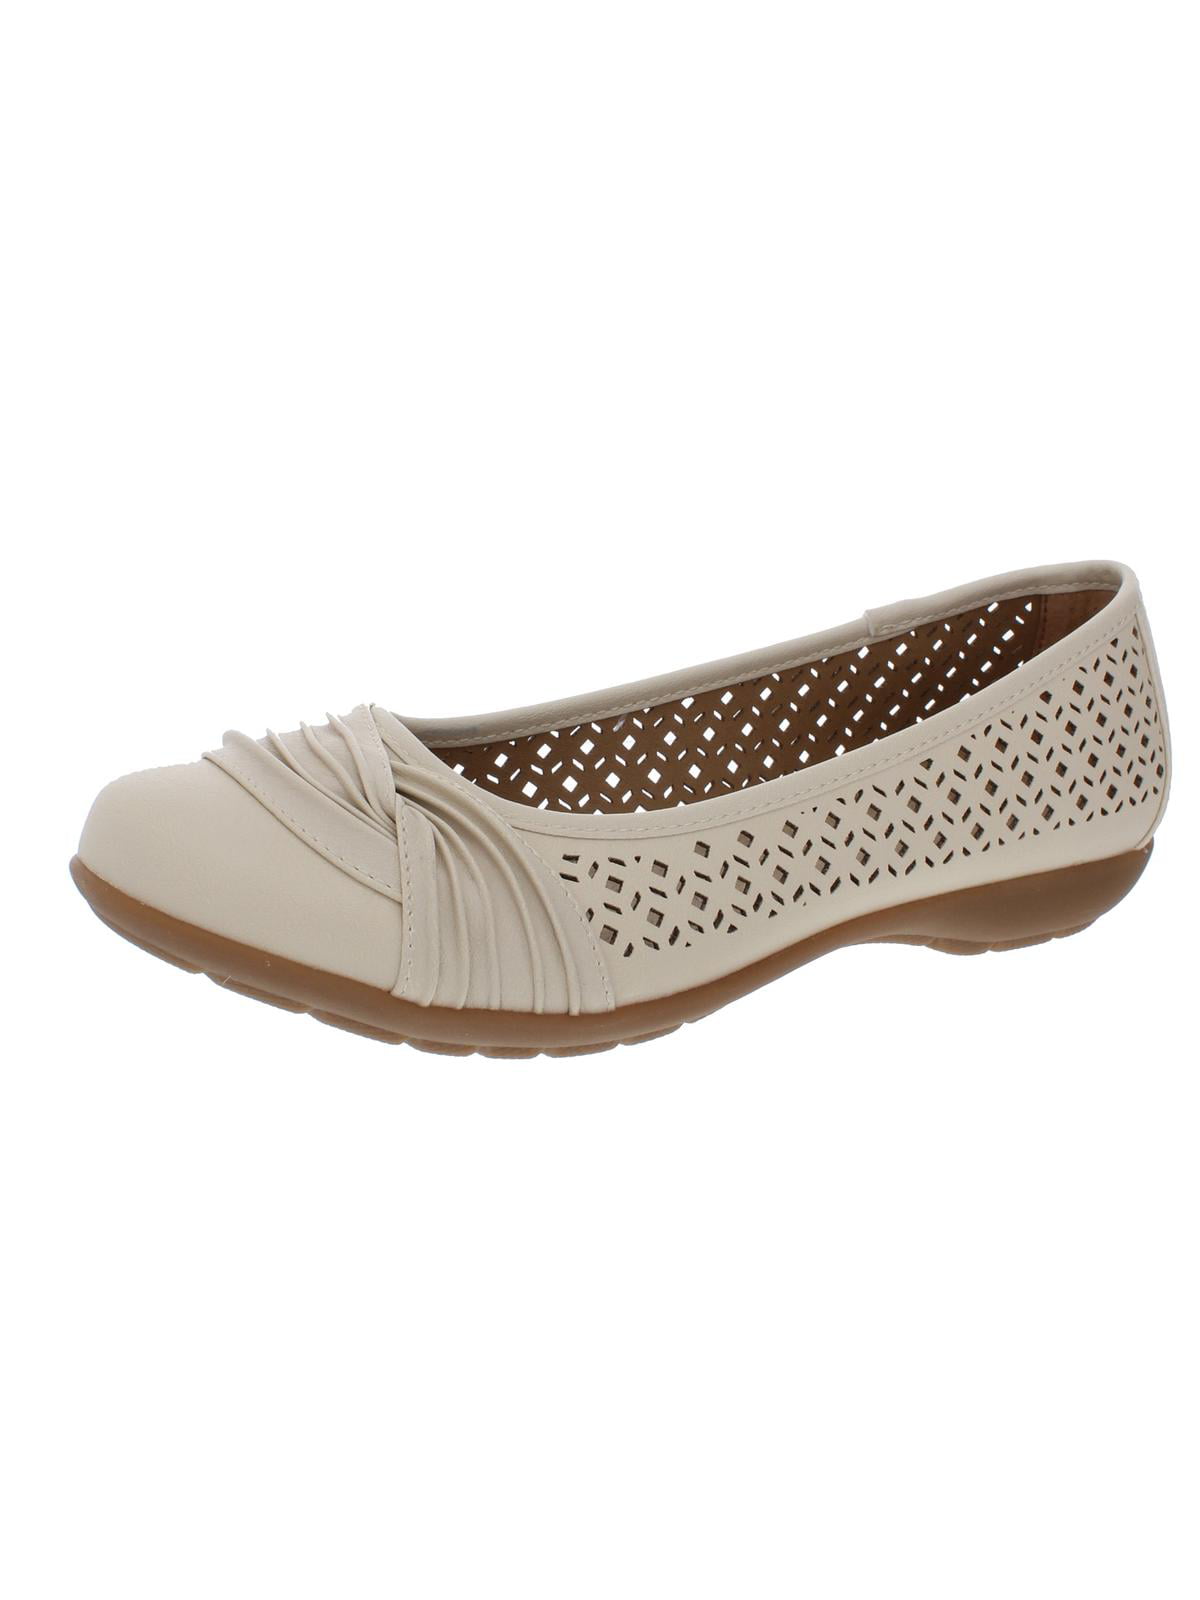 Details about   White Mountain Womens Sable Round Toe Ballet Flats 